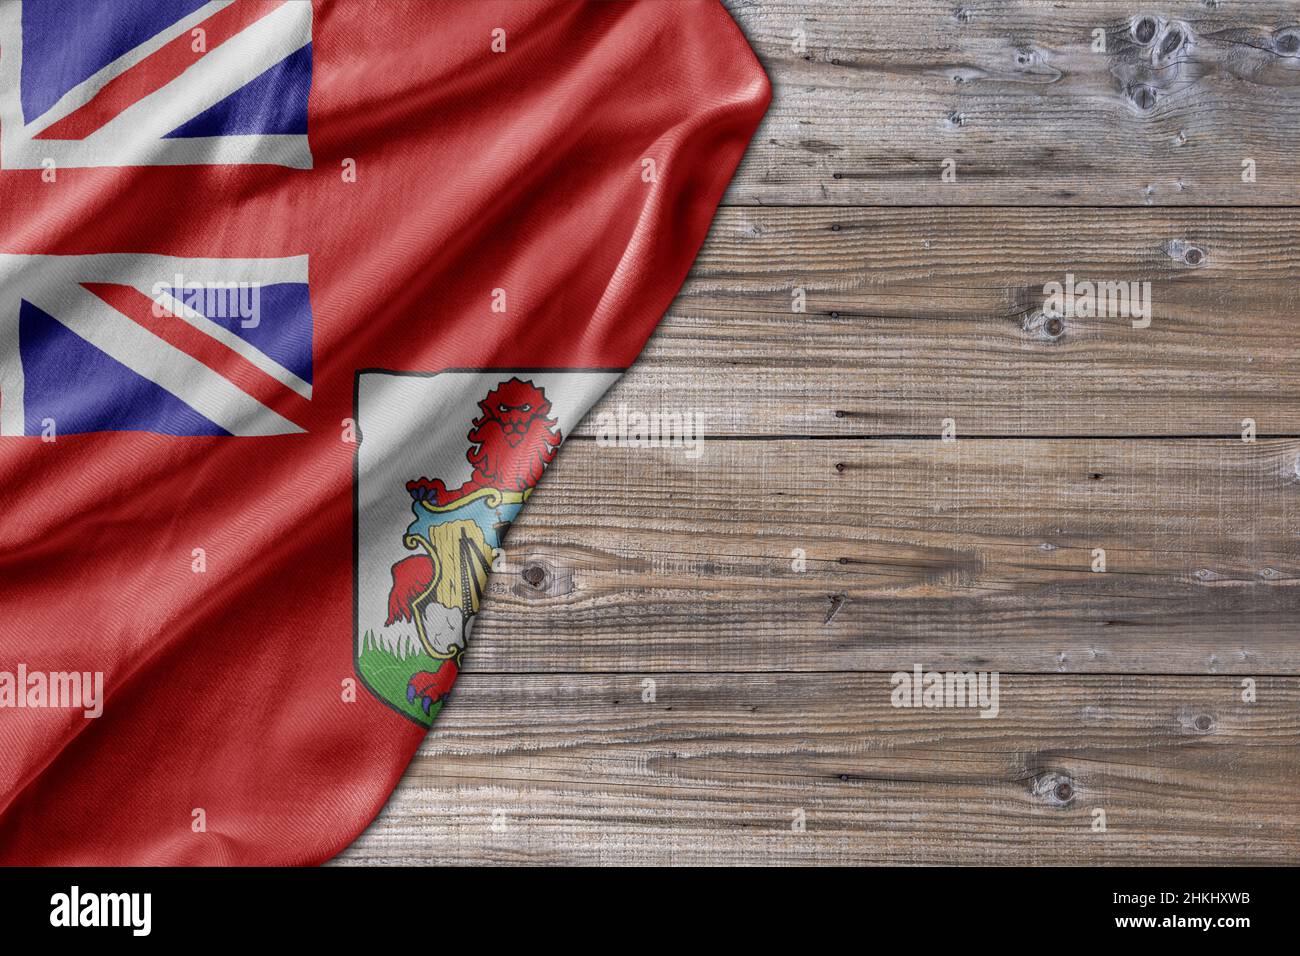 Wooden pattern old nature table board with Bermuda flag Stock Photo - Alamy